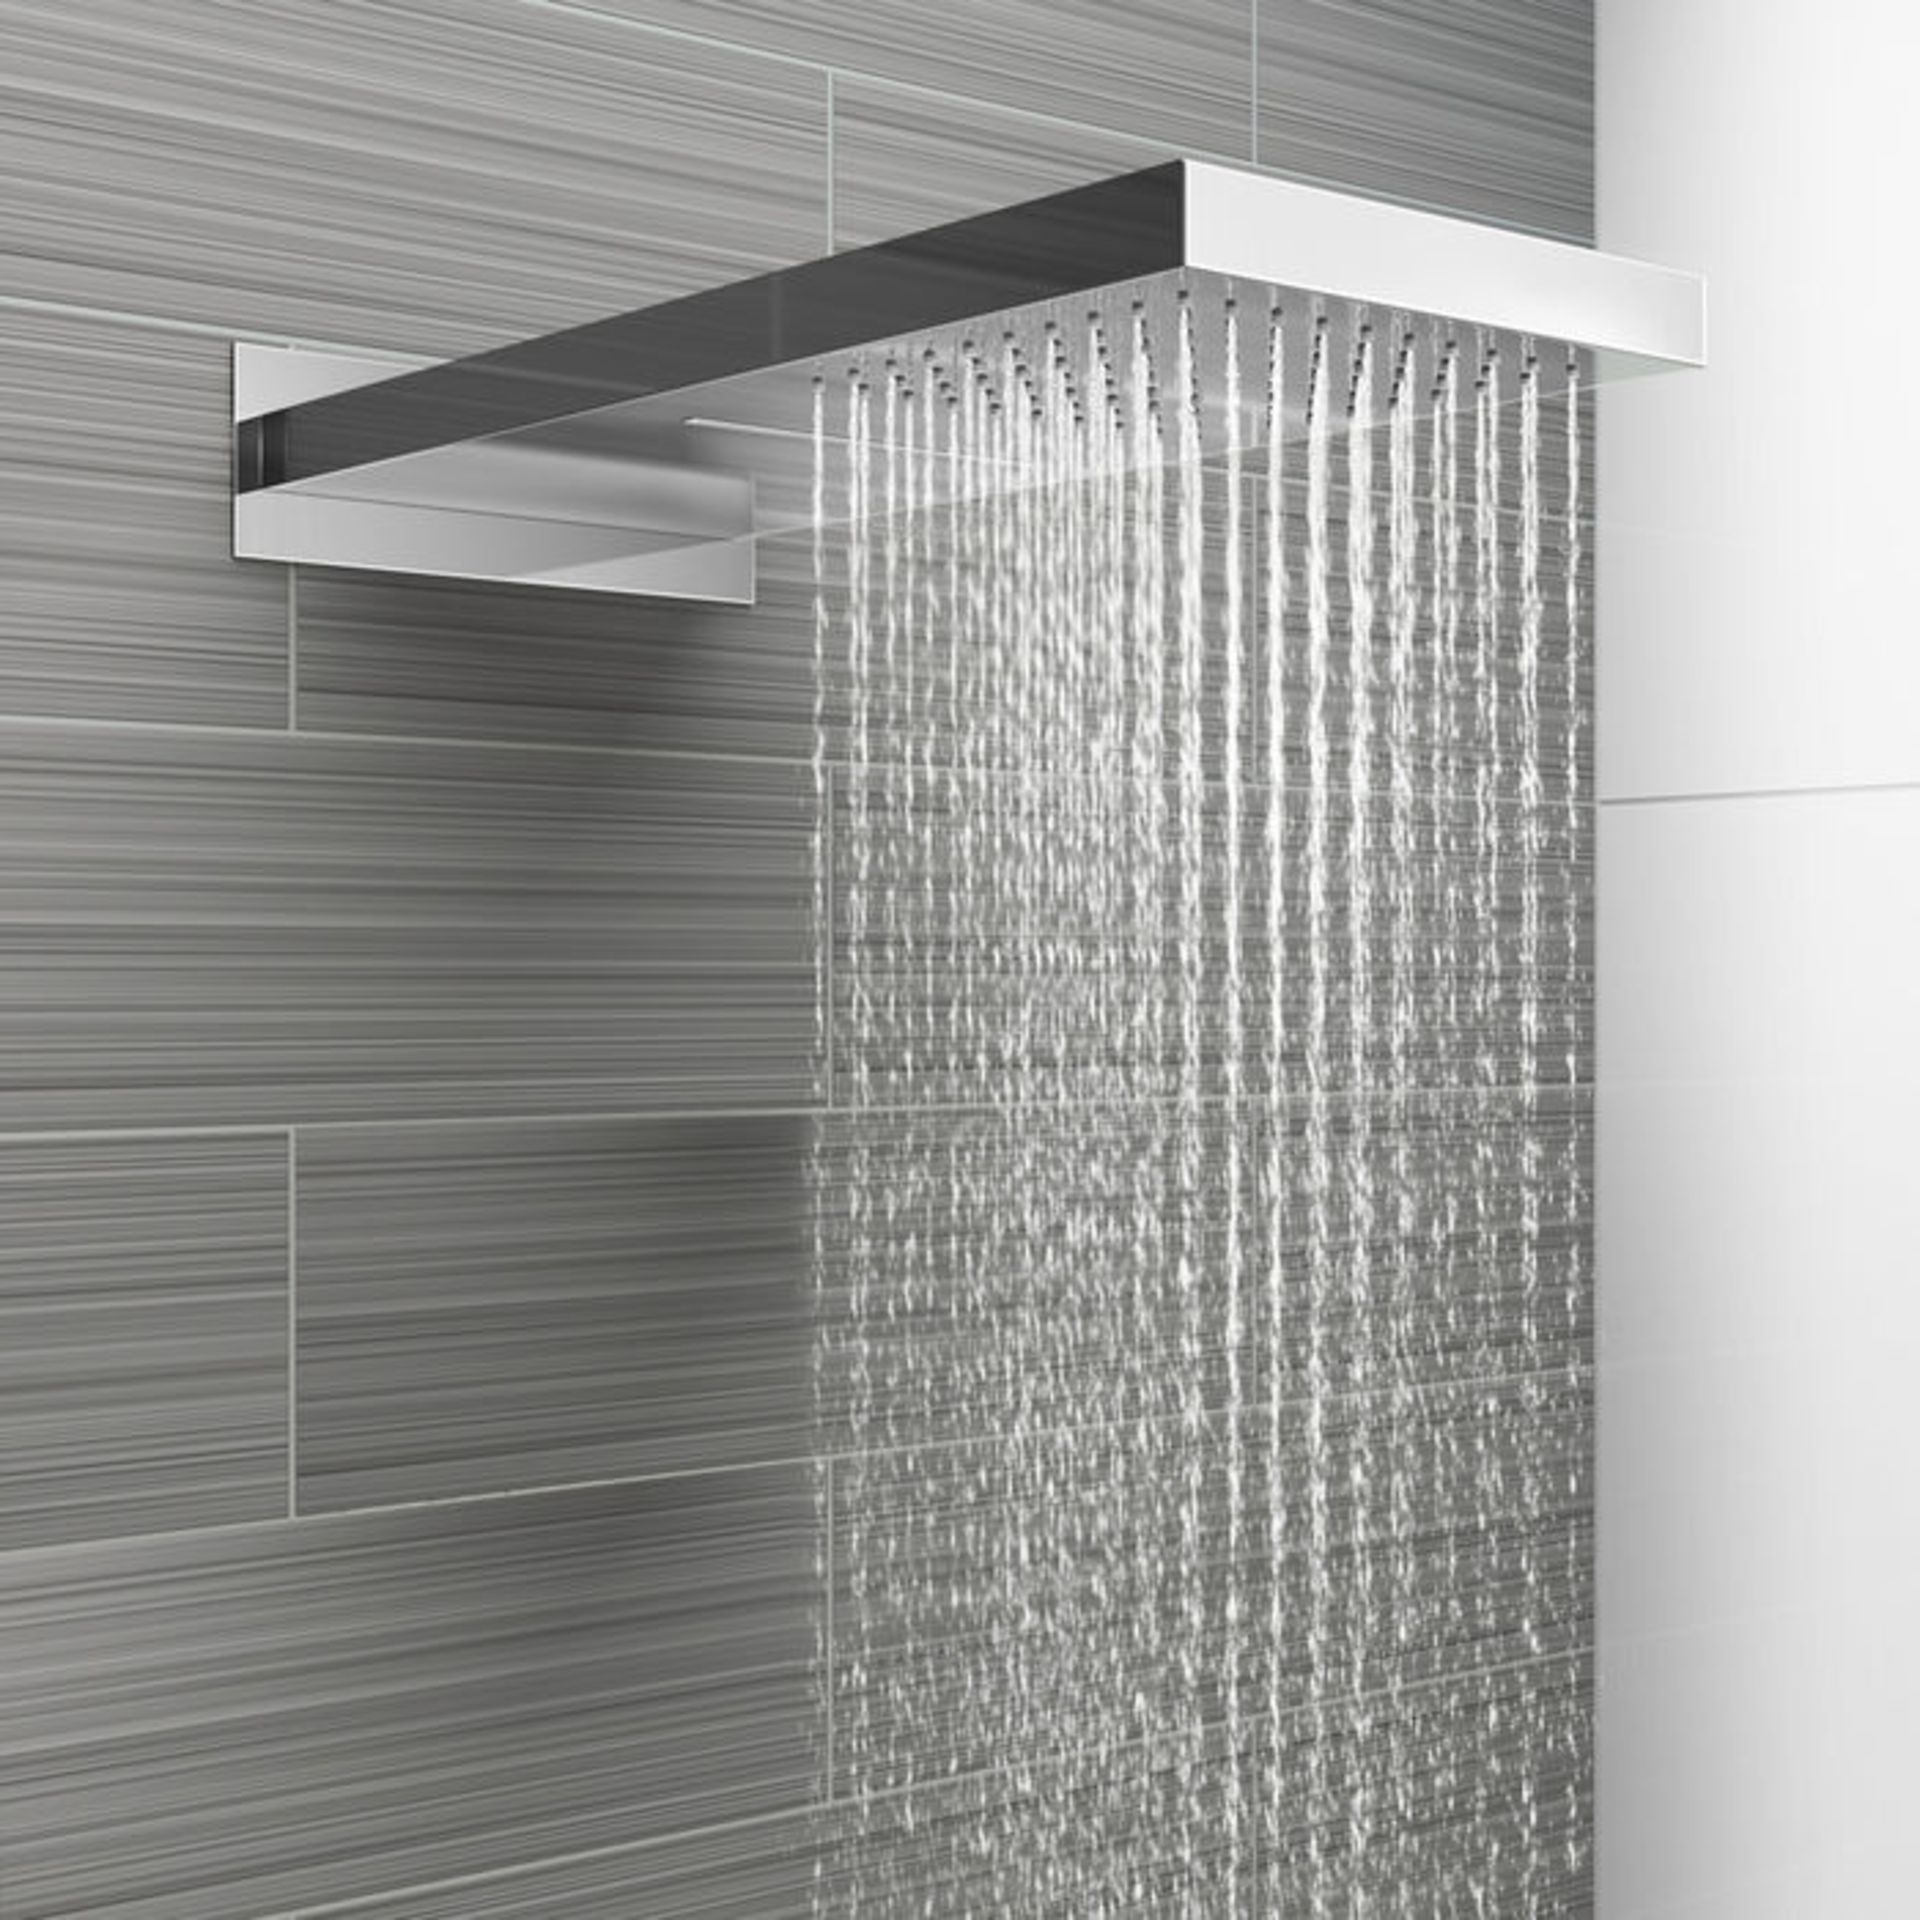 (CT7) 230x500mm Stainless Steel Waterfall Shower Head. RRP £374.98. Dual function waterfall and - Image 6 of 12